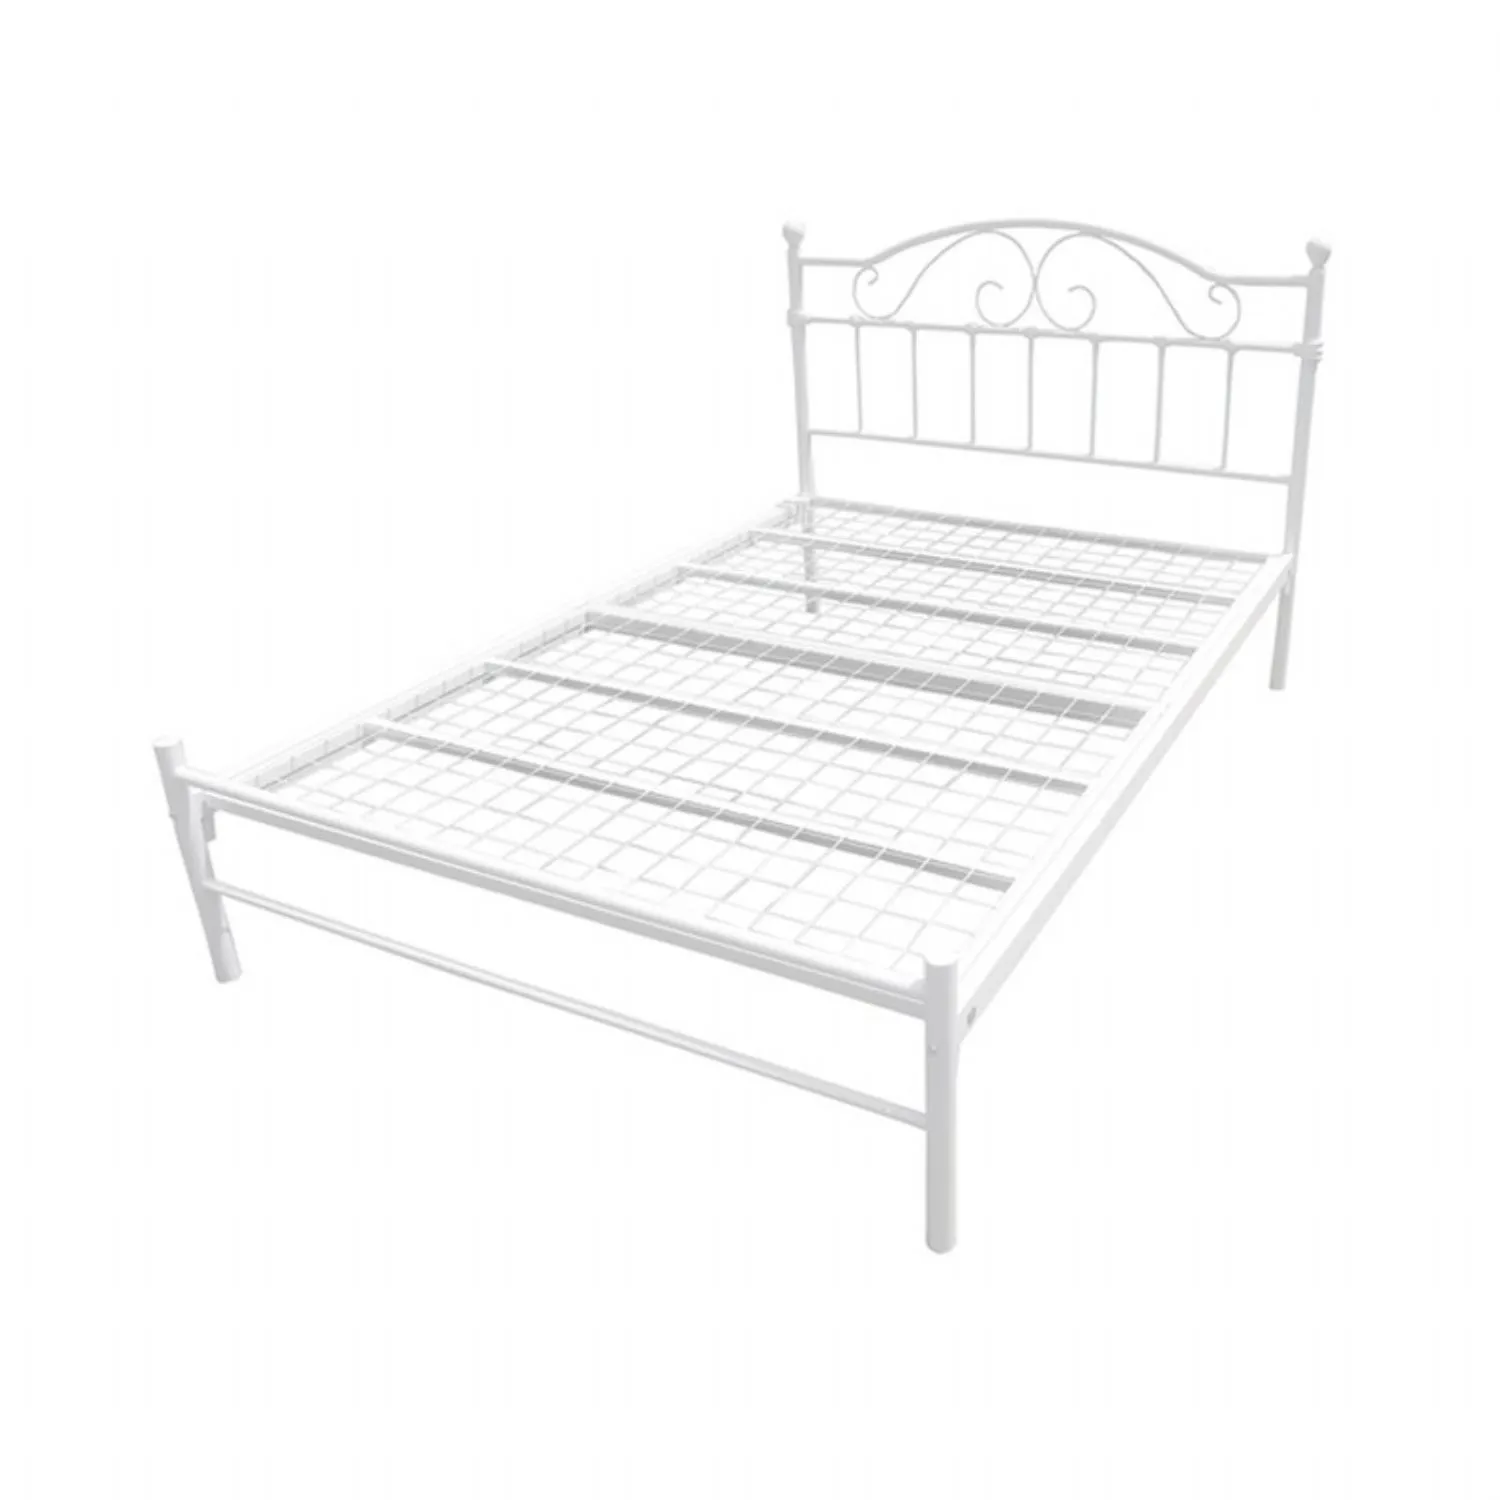 White Metal Bed Mesh Based Contract 5ft